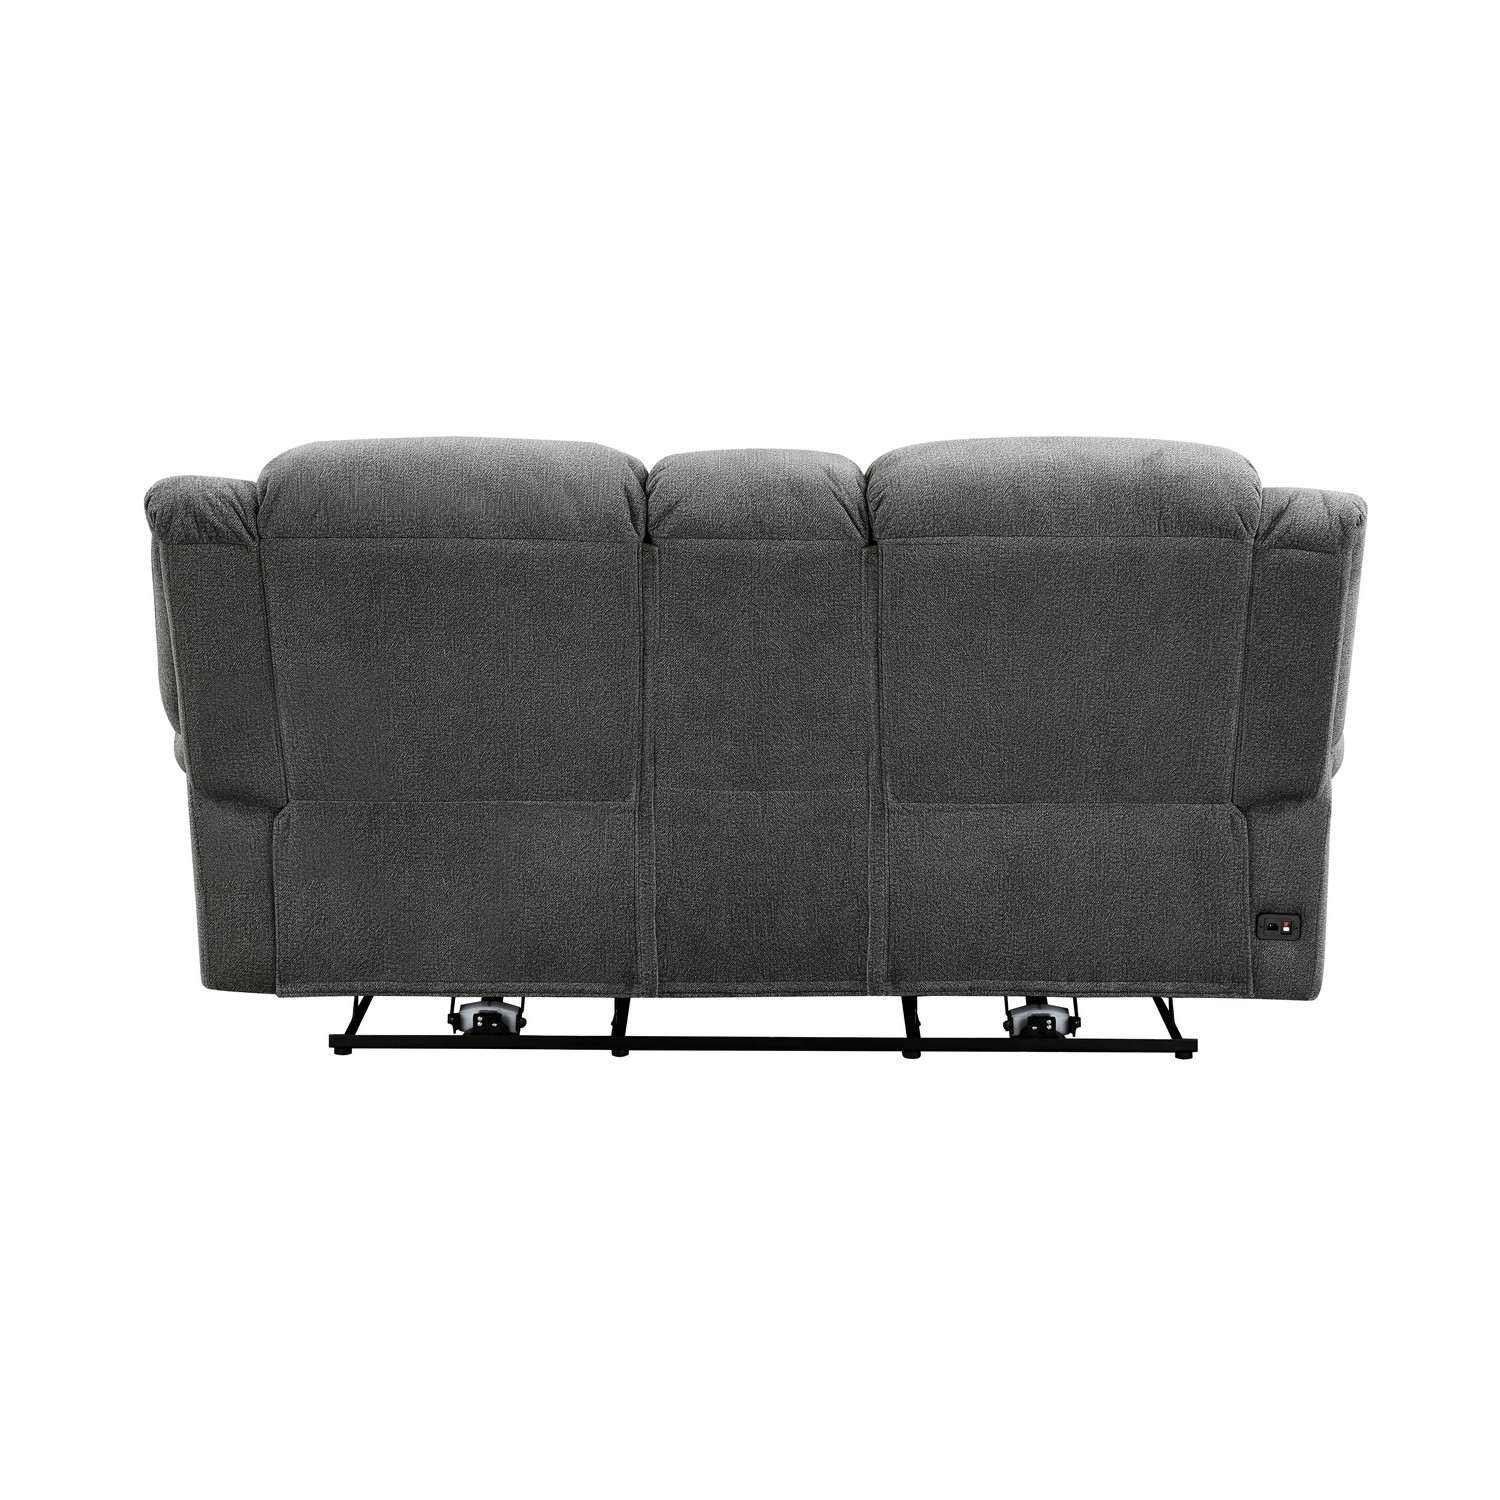 Homelegance Brennen Power Double Reclining Love Seat - Charcoal